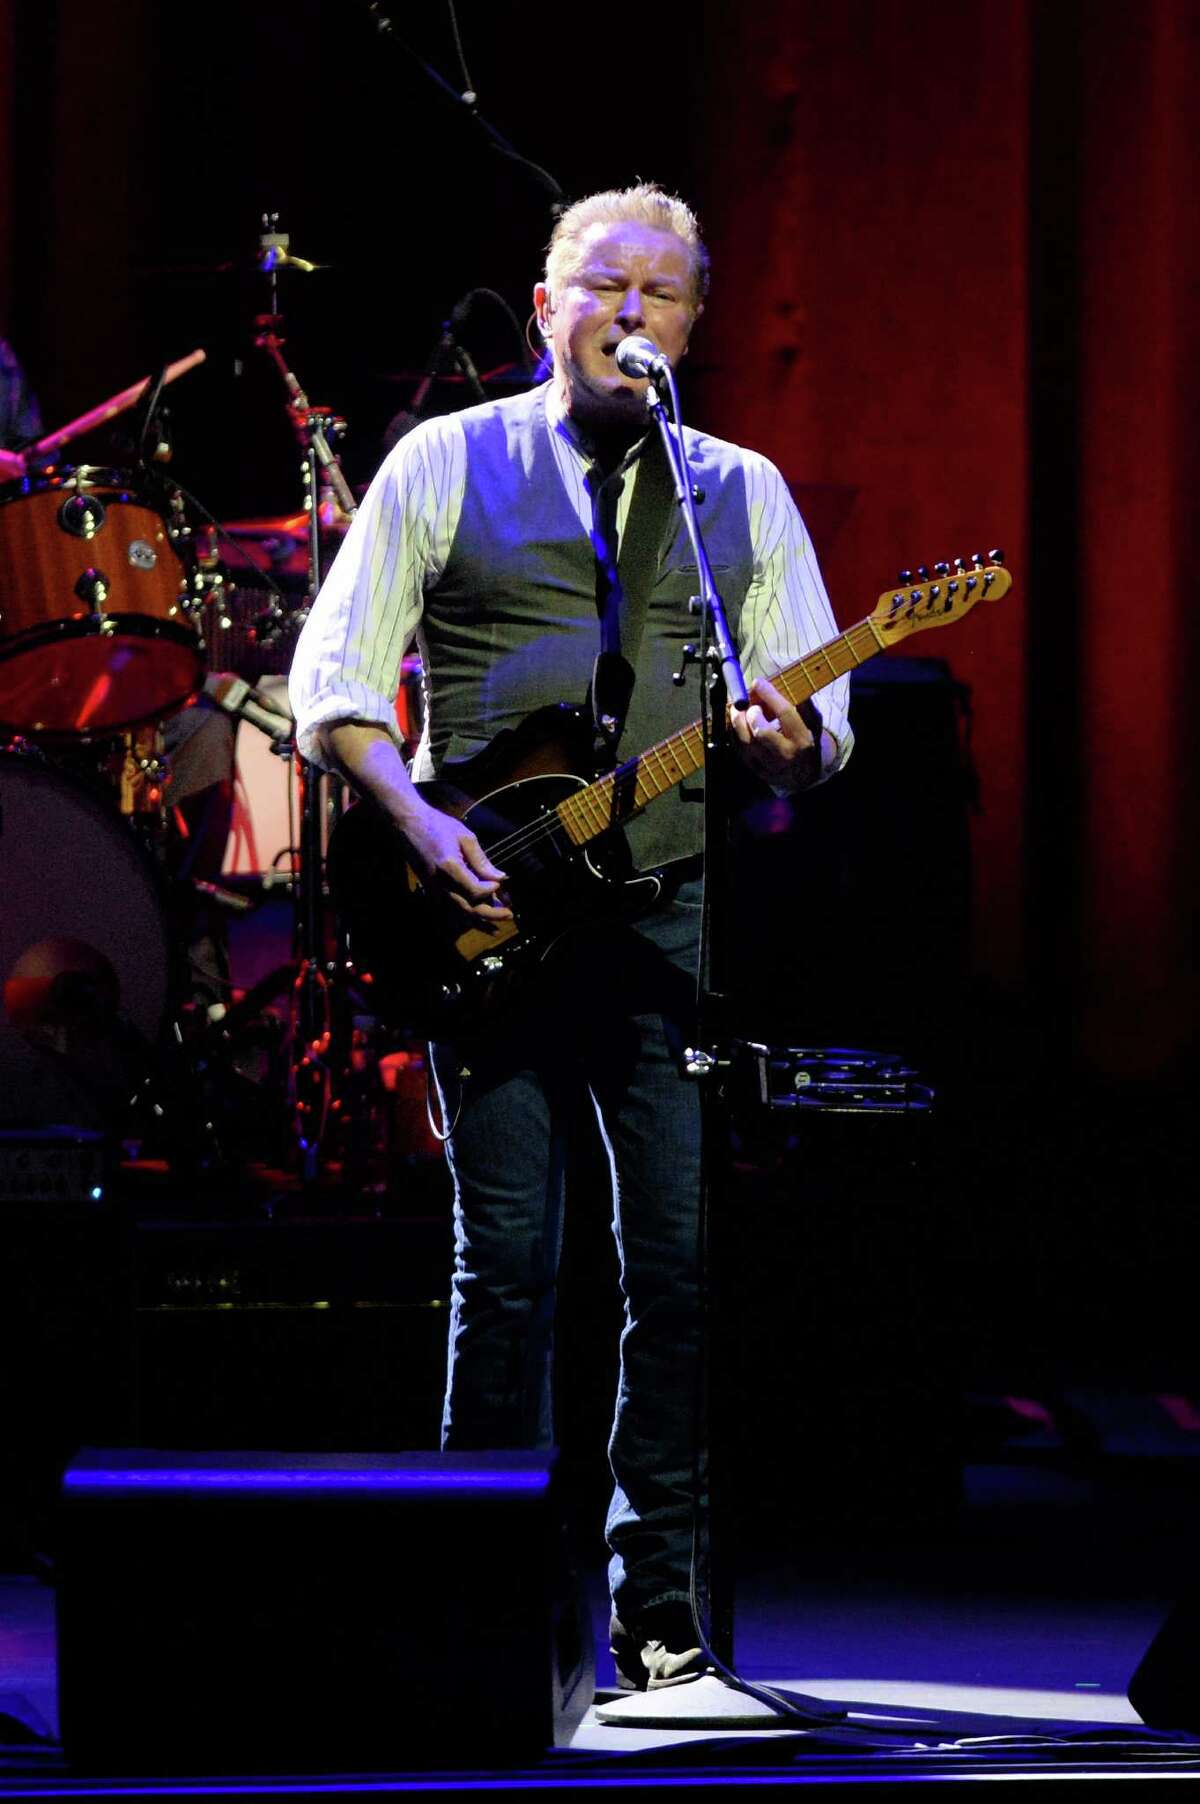 Don Henley performs "Dirty Laundry" at the Smart Financial Centre in Sugar Land on Sunday January 15, 2017 during the venue's opening weekend.